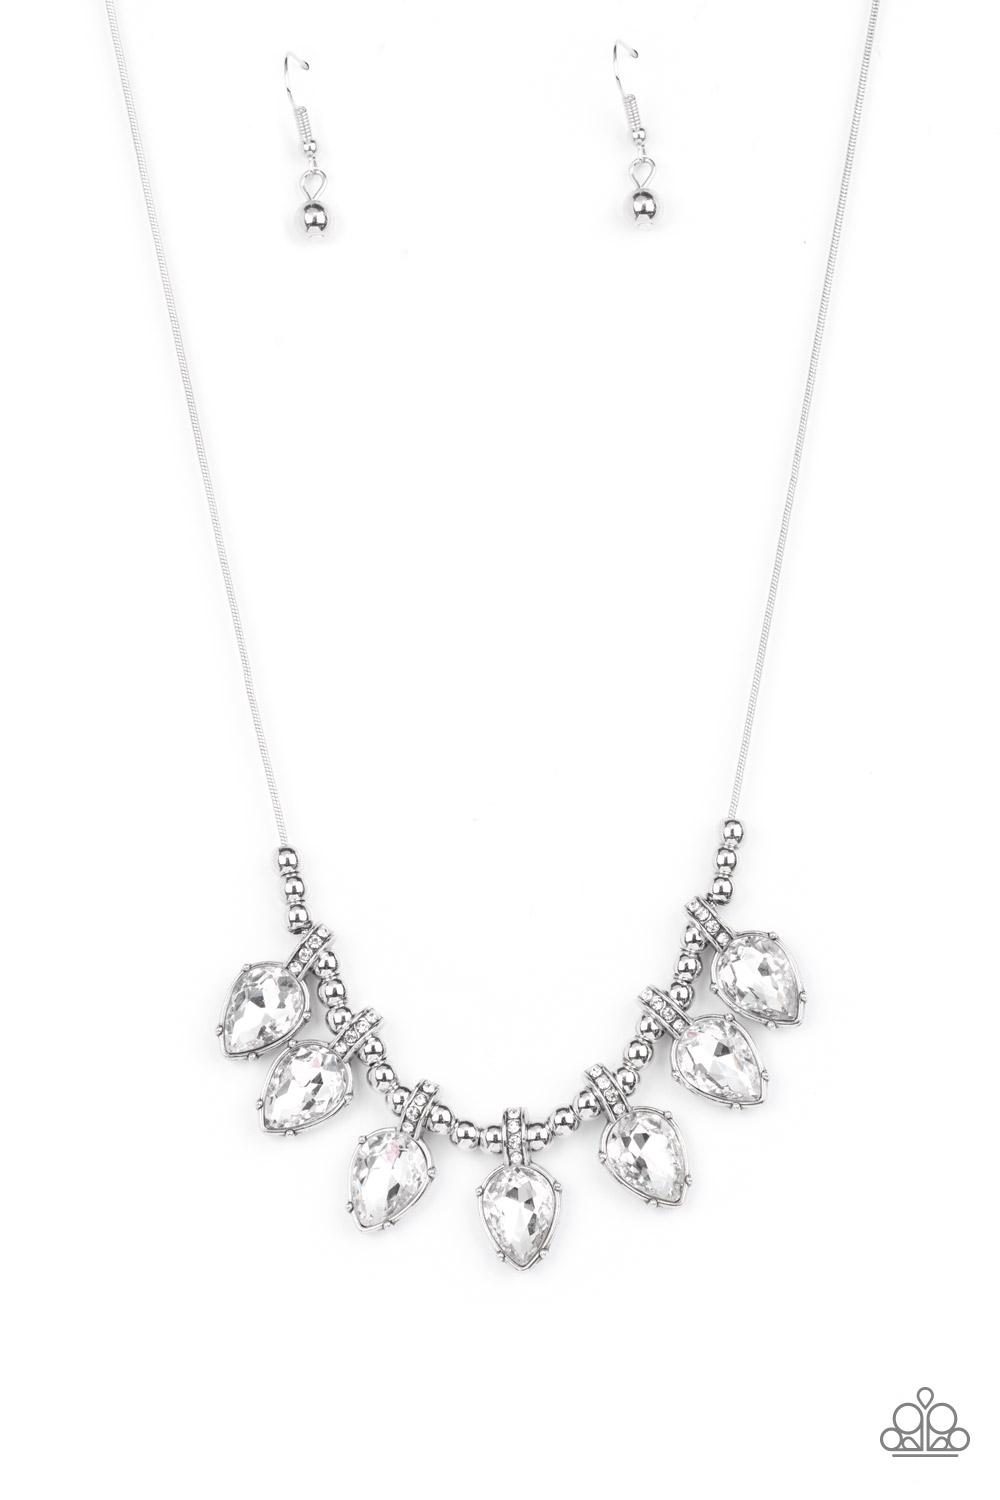 Necklace - Crown Jewel Couture - White